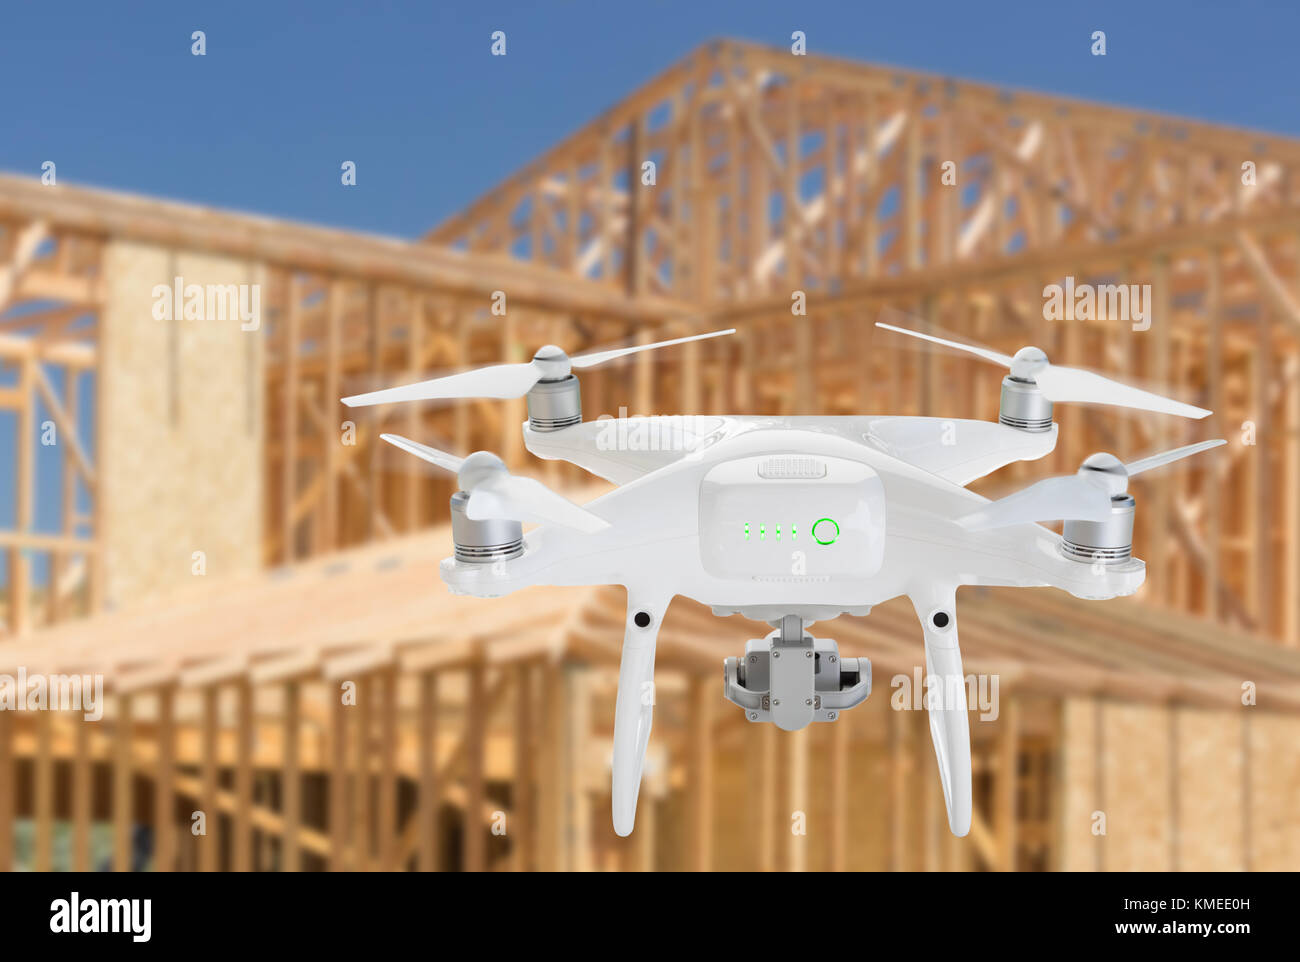 Unmanned Aircraft System (UAV) Quadcopter Drone In The Air Over Construction Site. Stock Photo